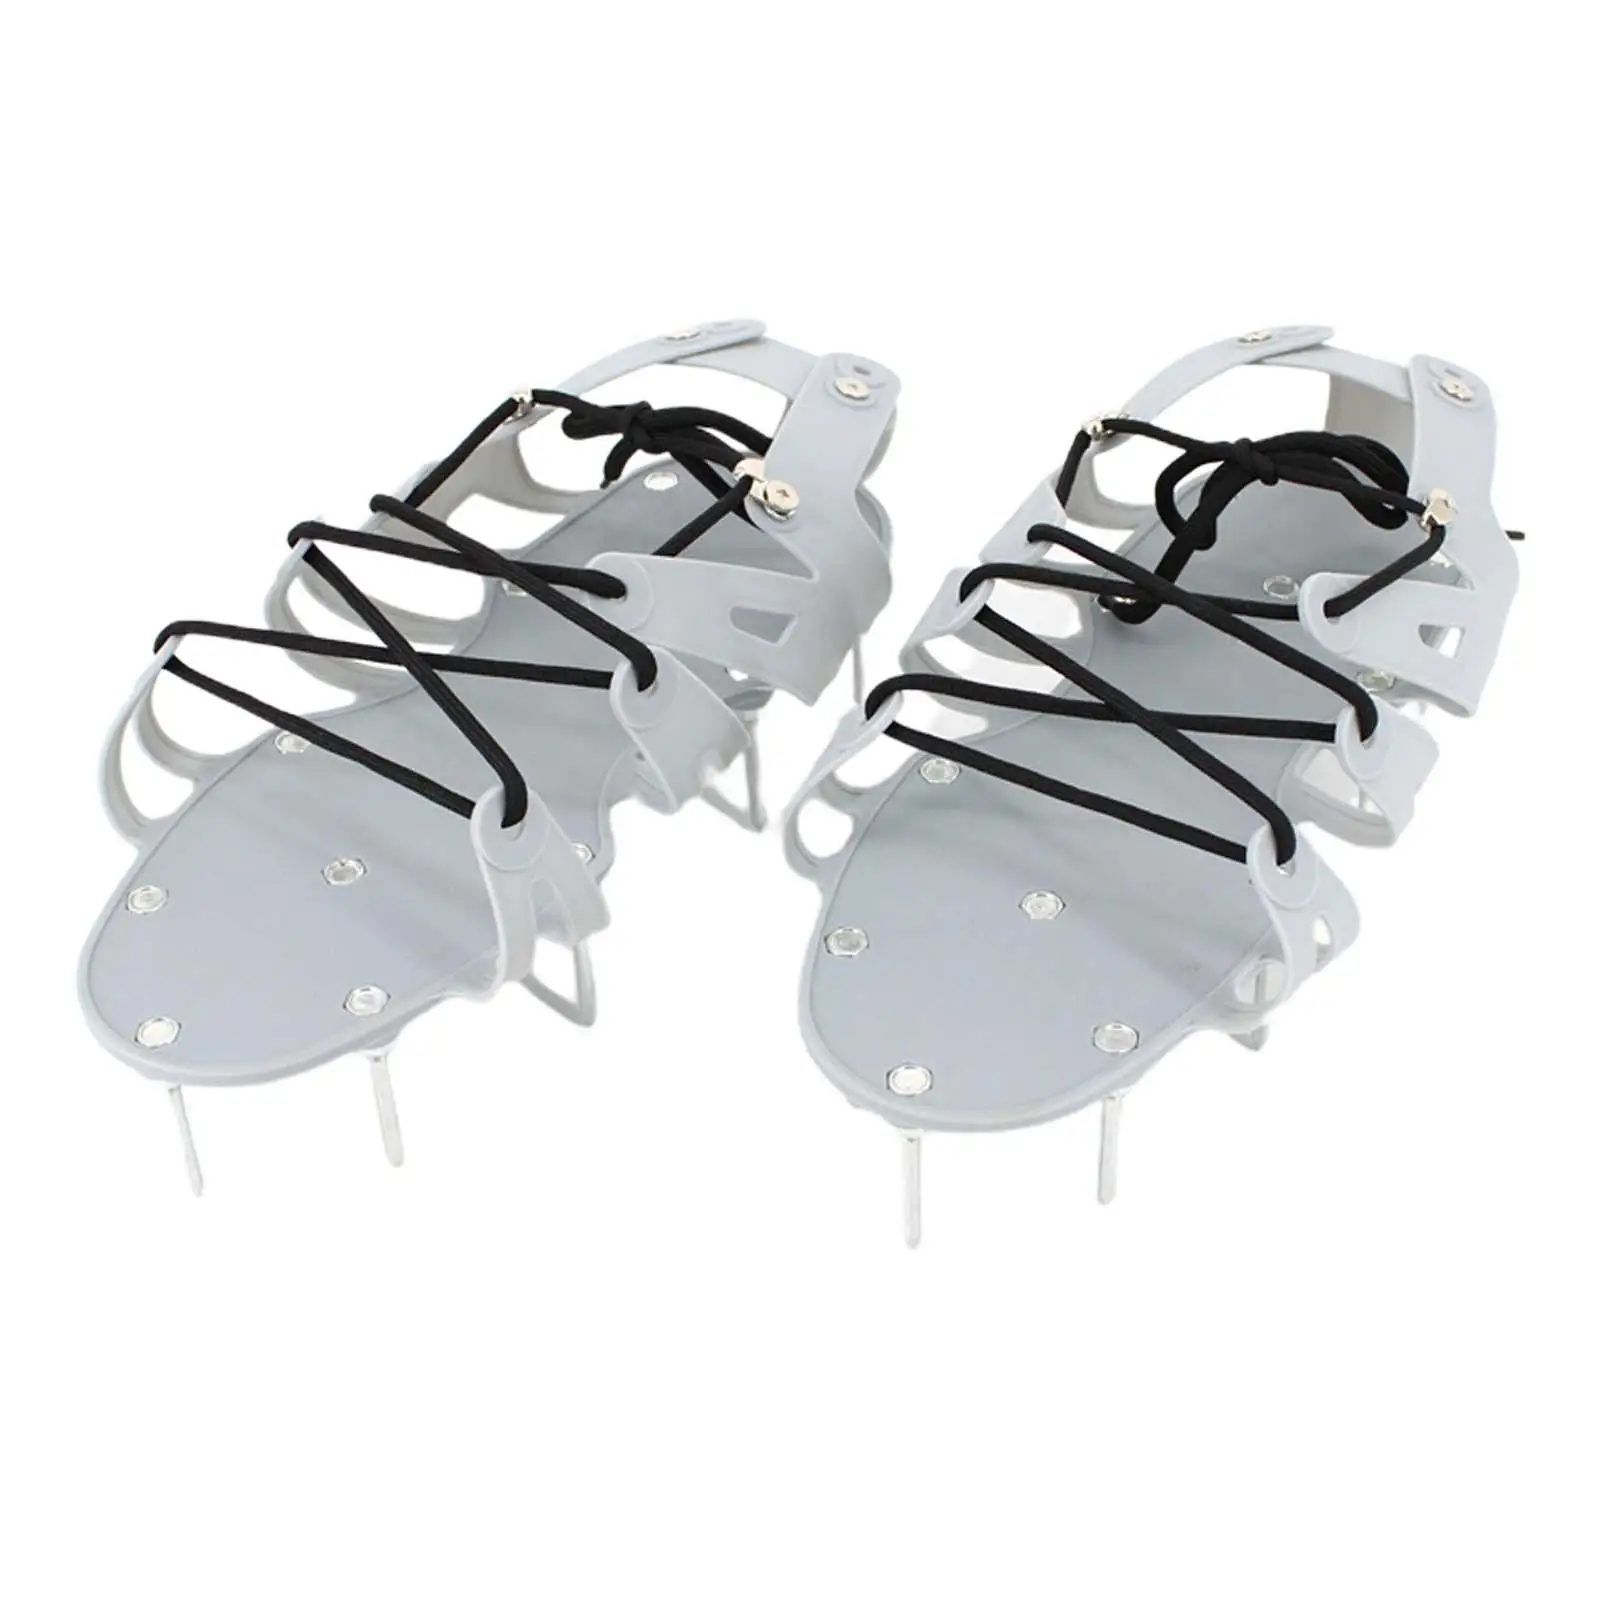 Lawn Aerator Shoes Heavy Duty Grass Aerator Shoes for Garden Floor Lawn Care